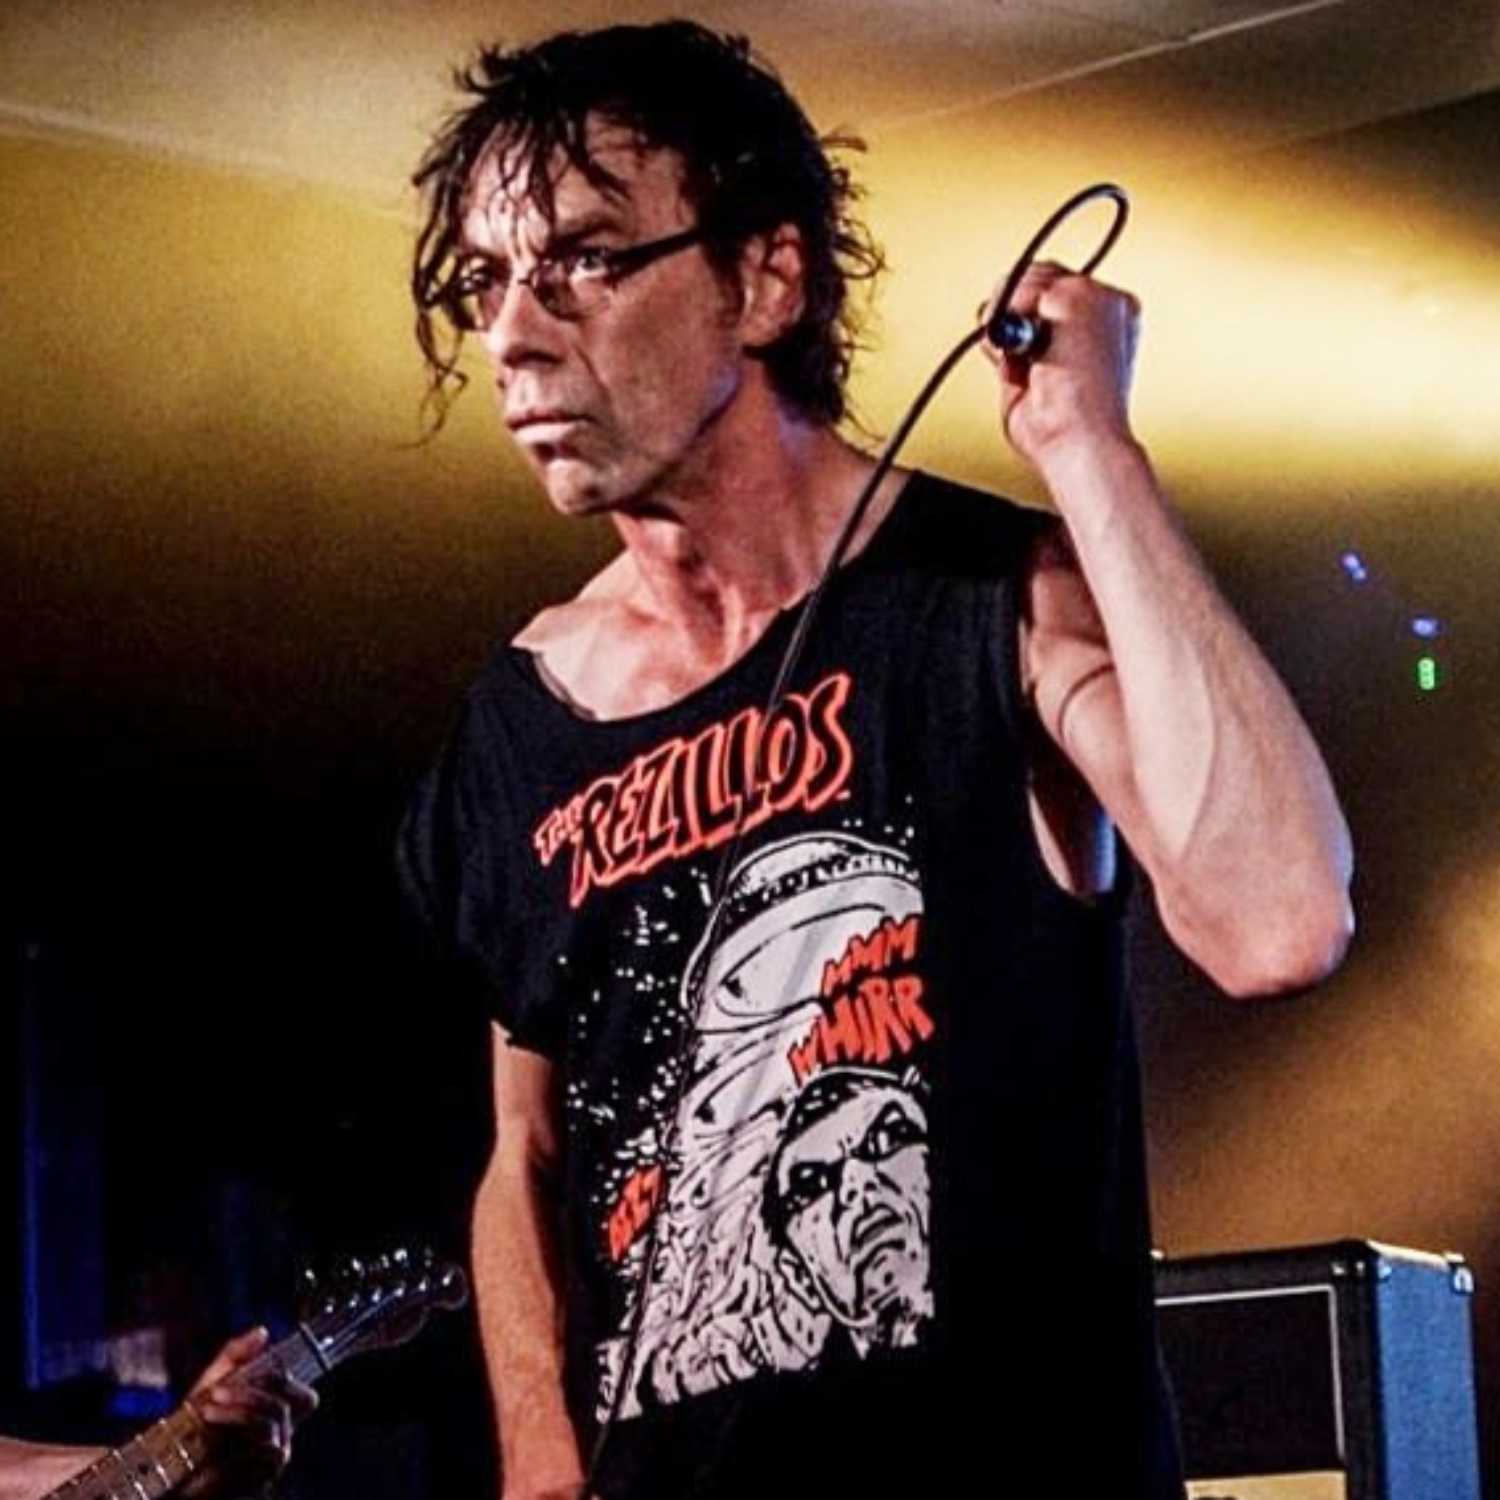 Dick Lucas of the Subhumans (and Citizen Fish and Culture Shock)